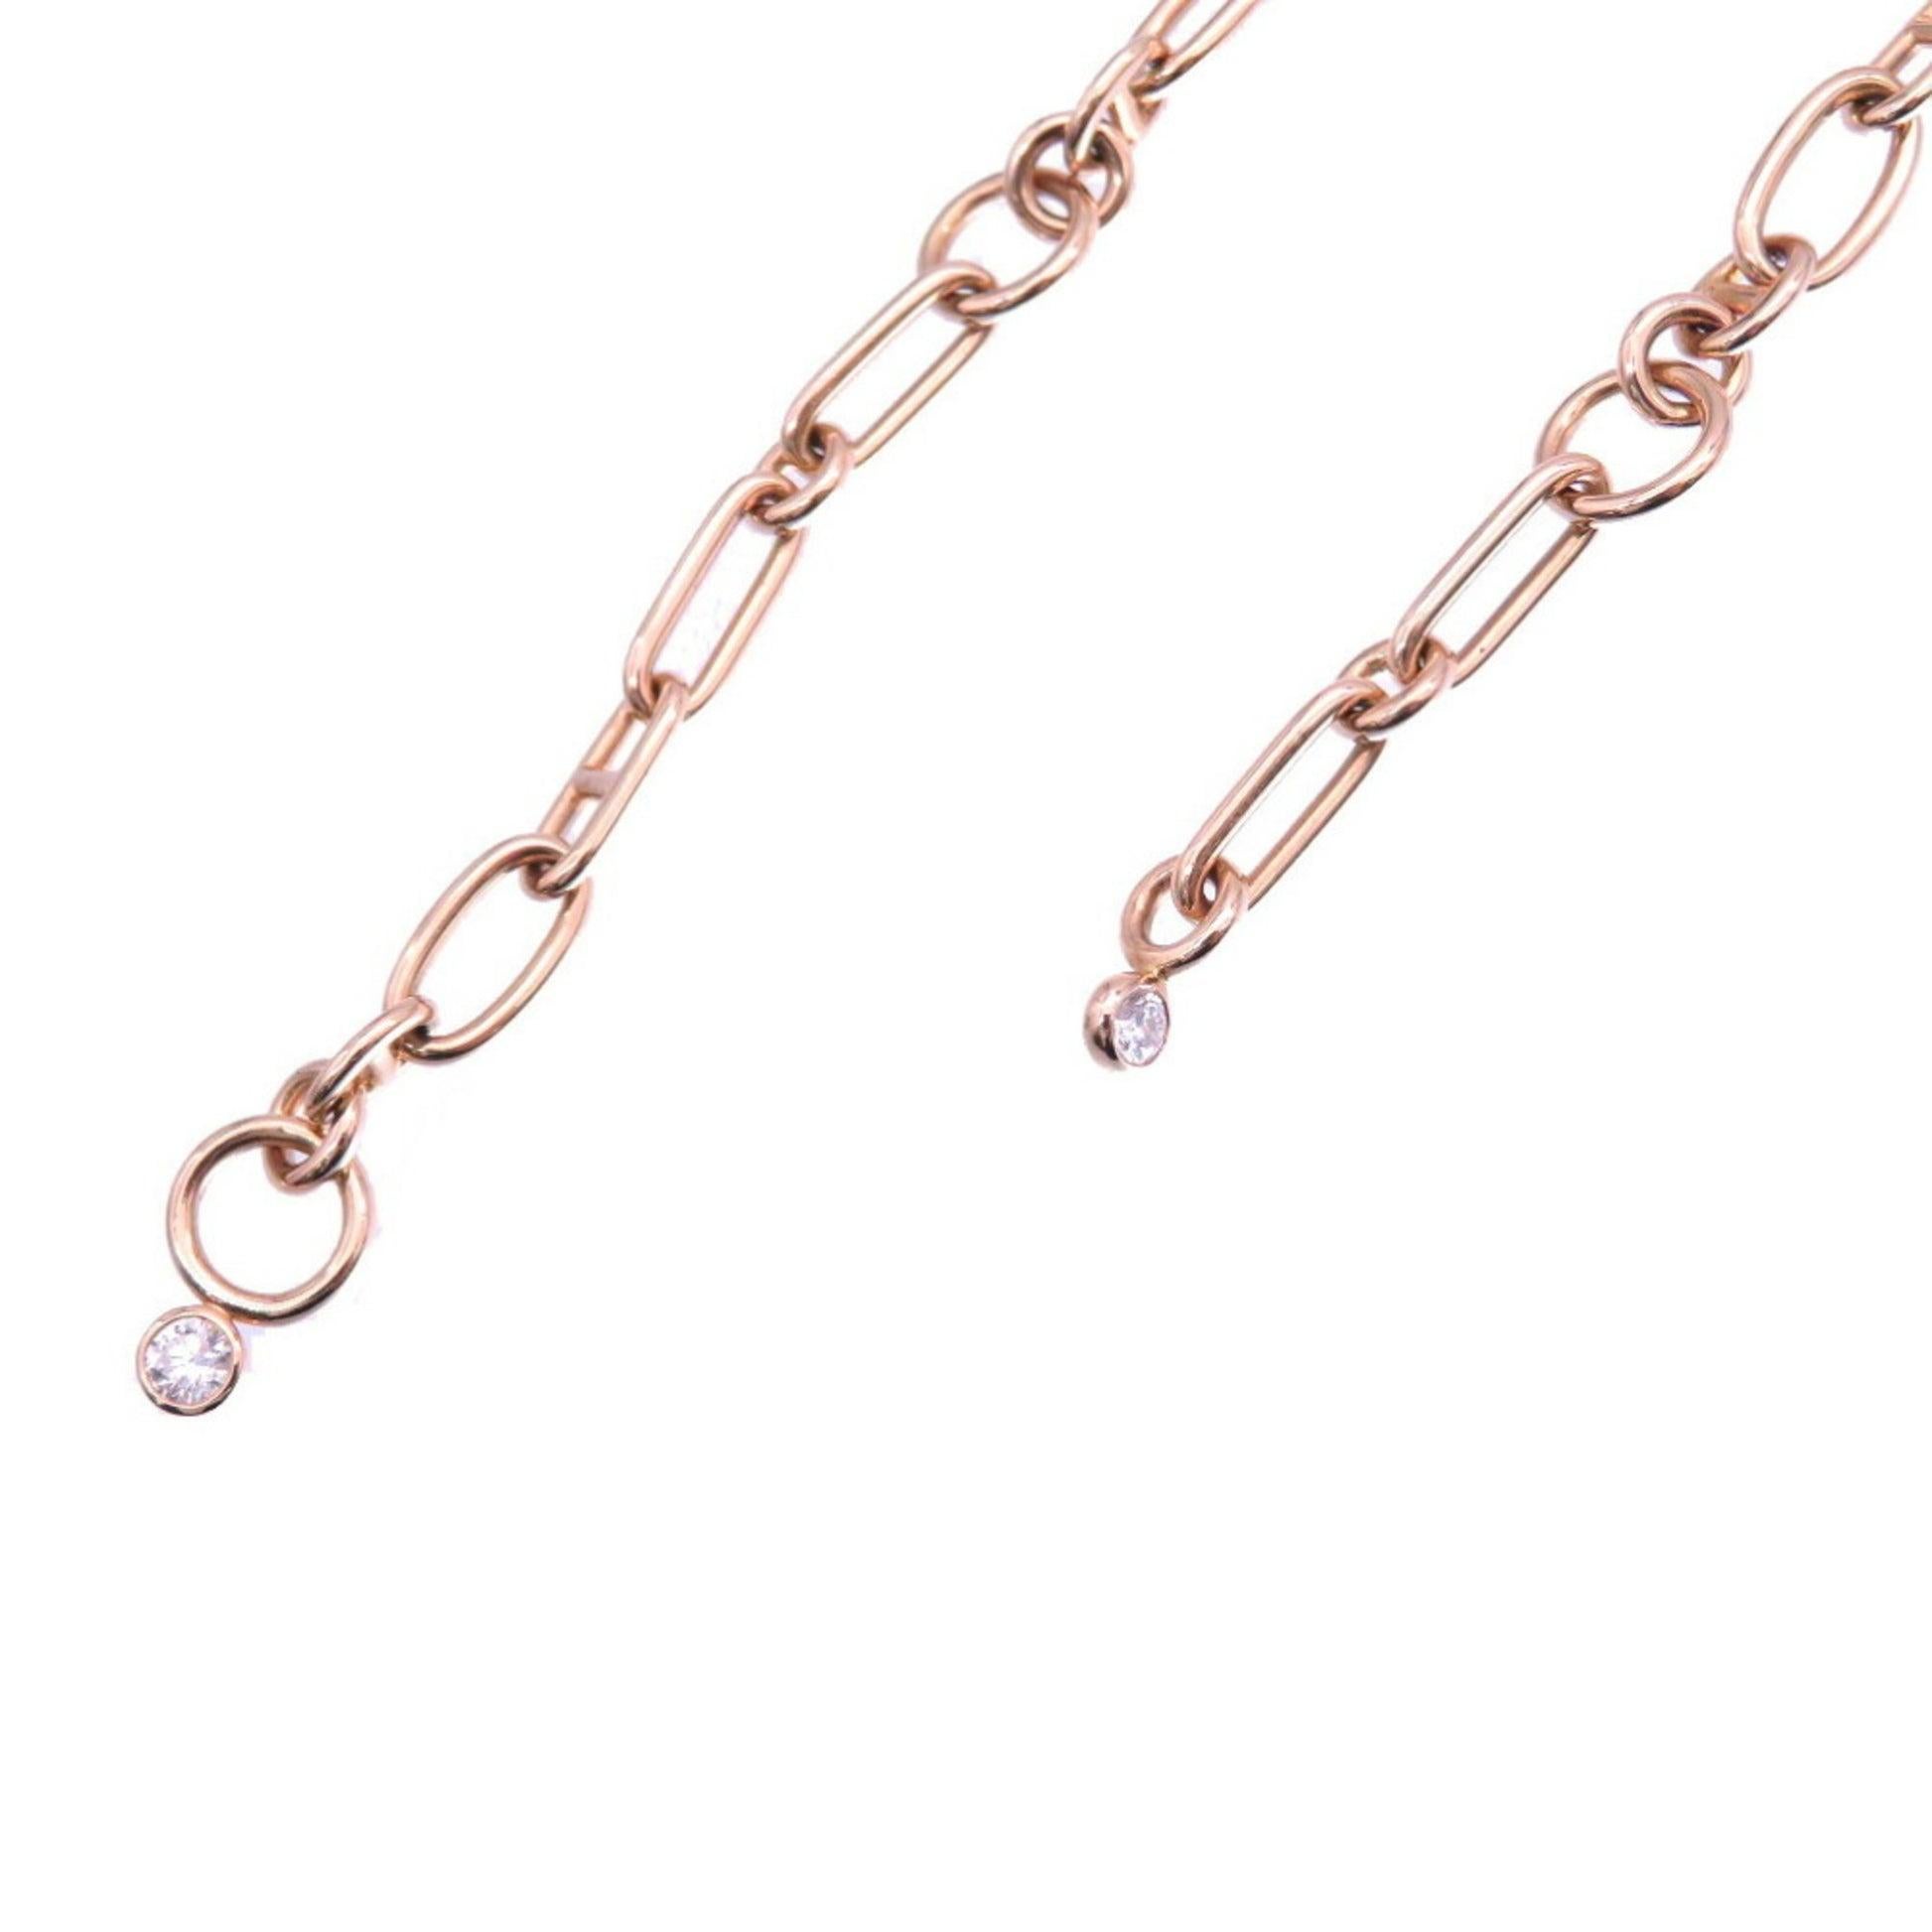 Hermes 1.75ct Diamond Kelly Long Necklace in 18K Rose Gold and White Gold For Sale 1